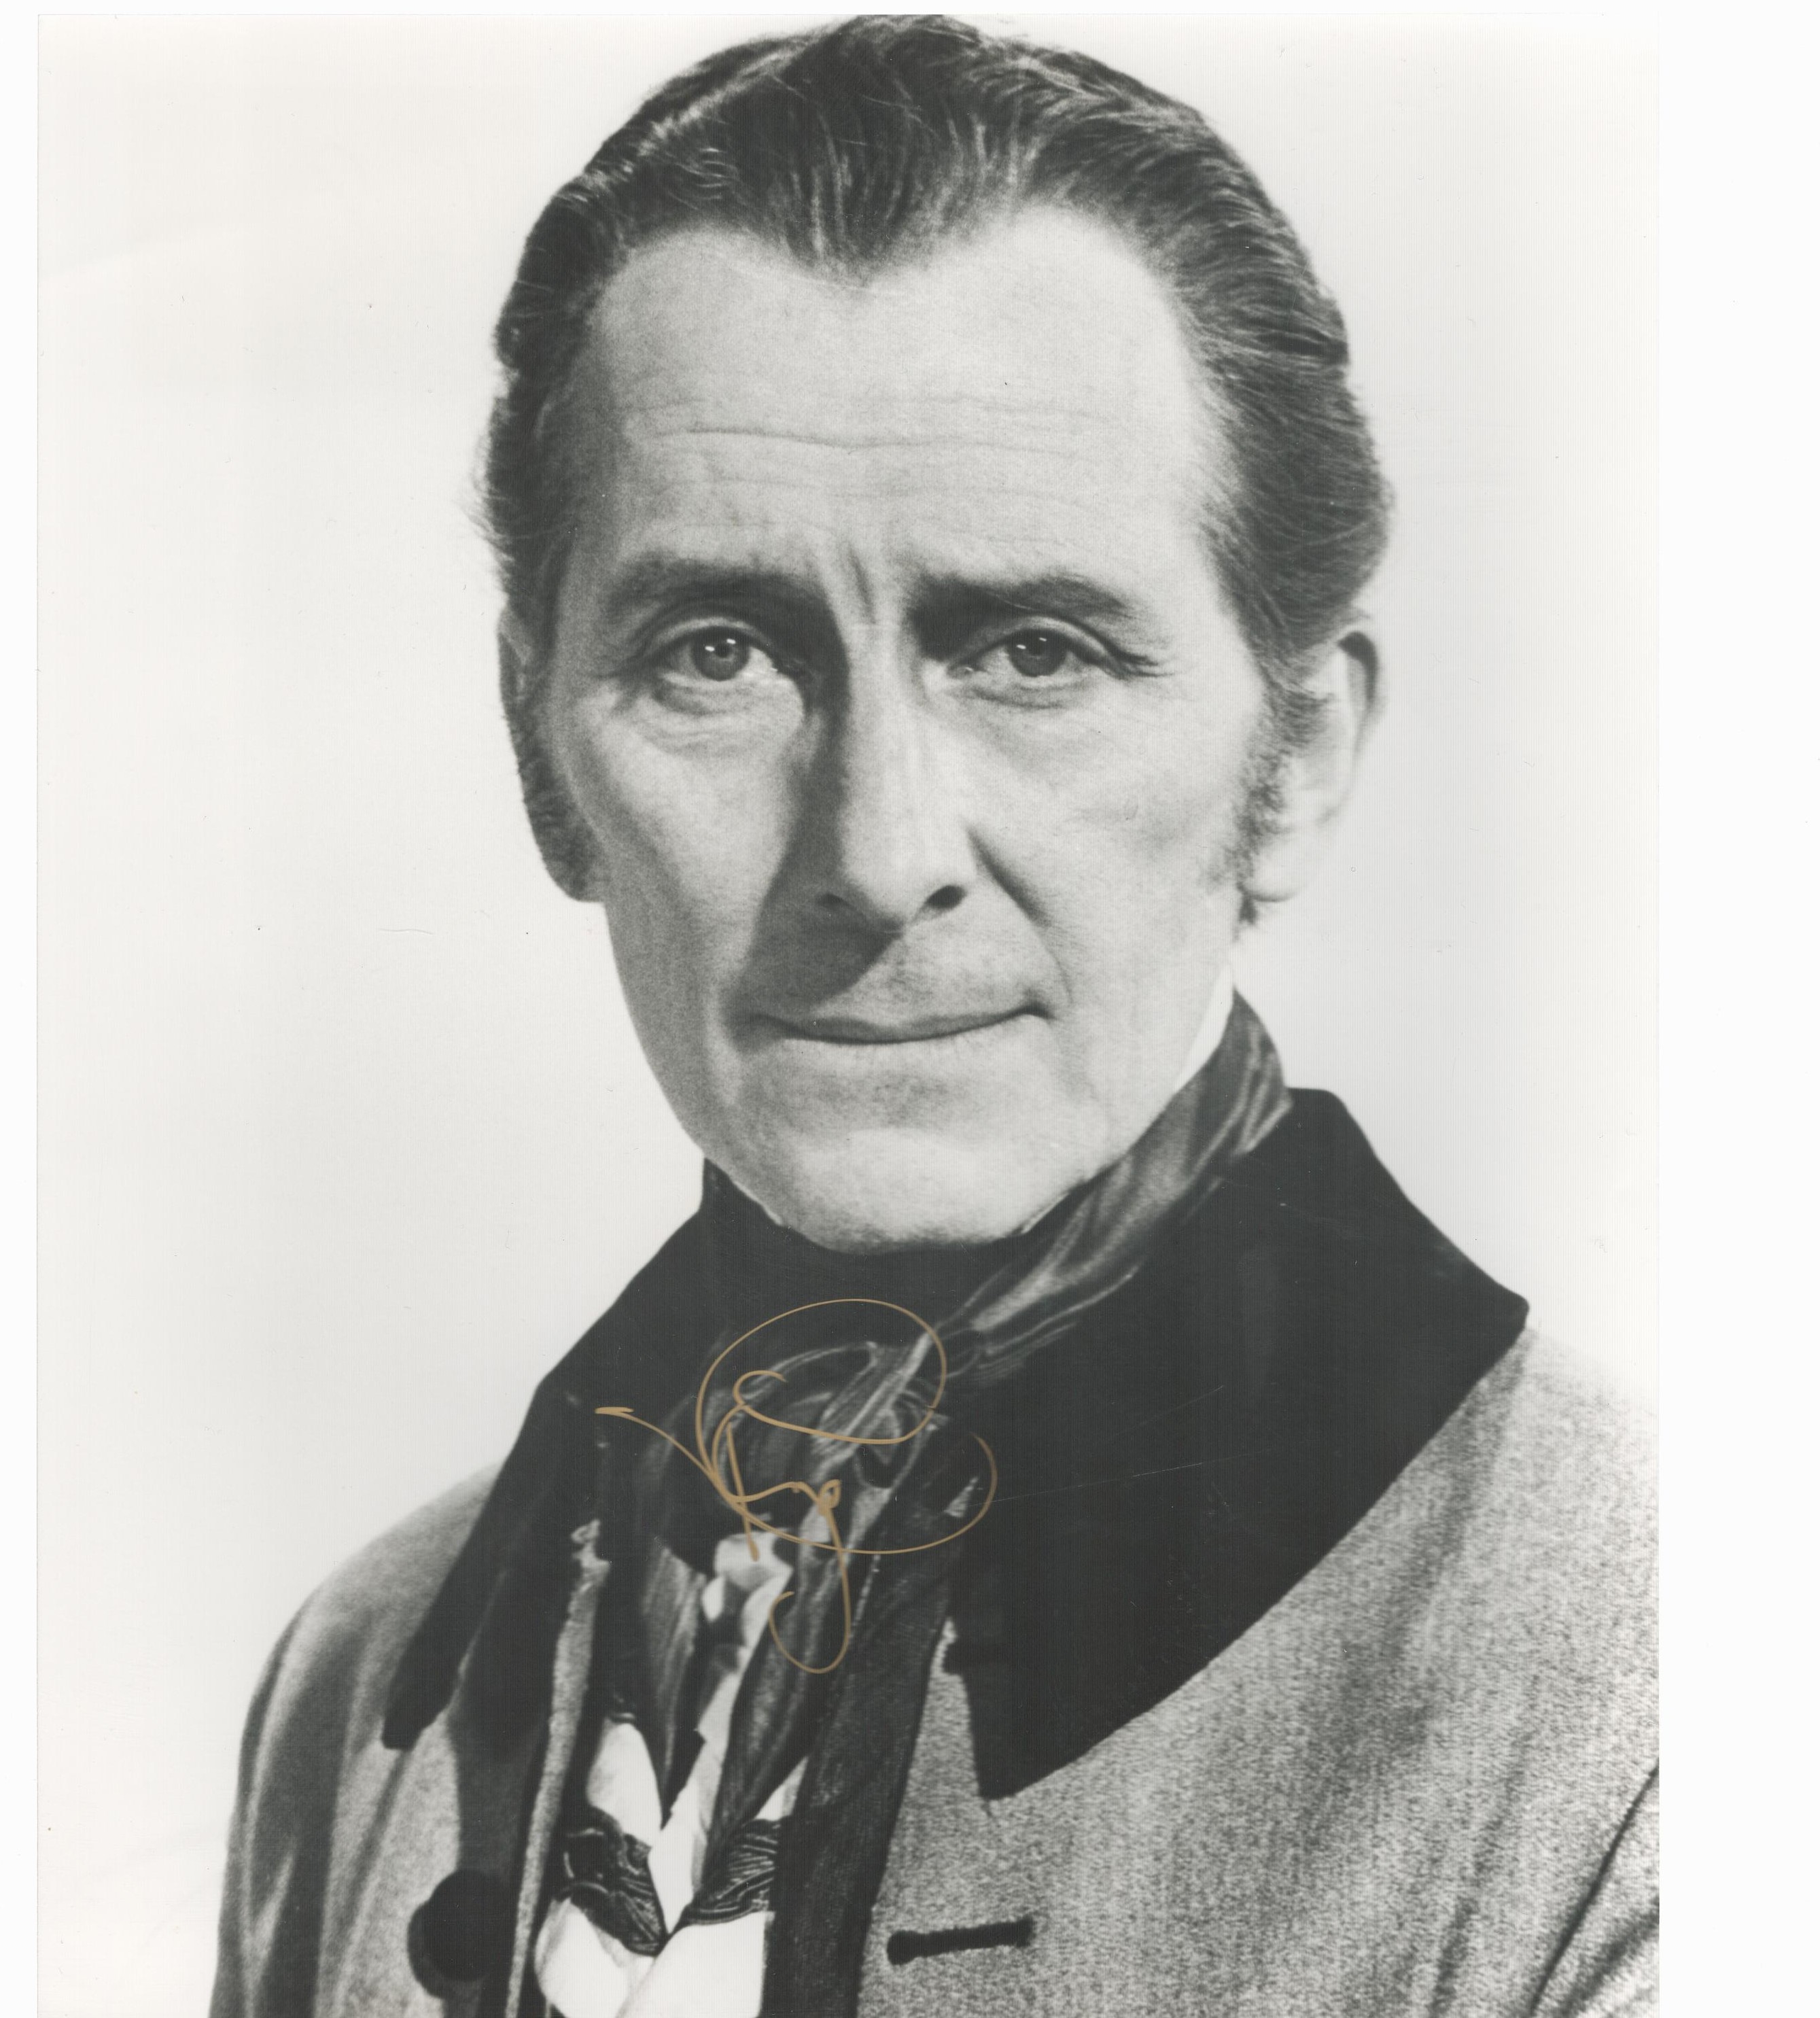 Peter Cushing signed 10x8 black and white photo. Good condition. All autographs are genuine hand